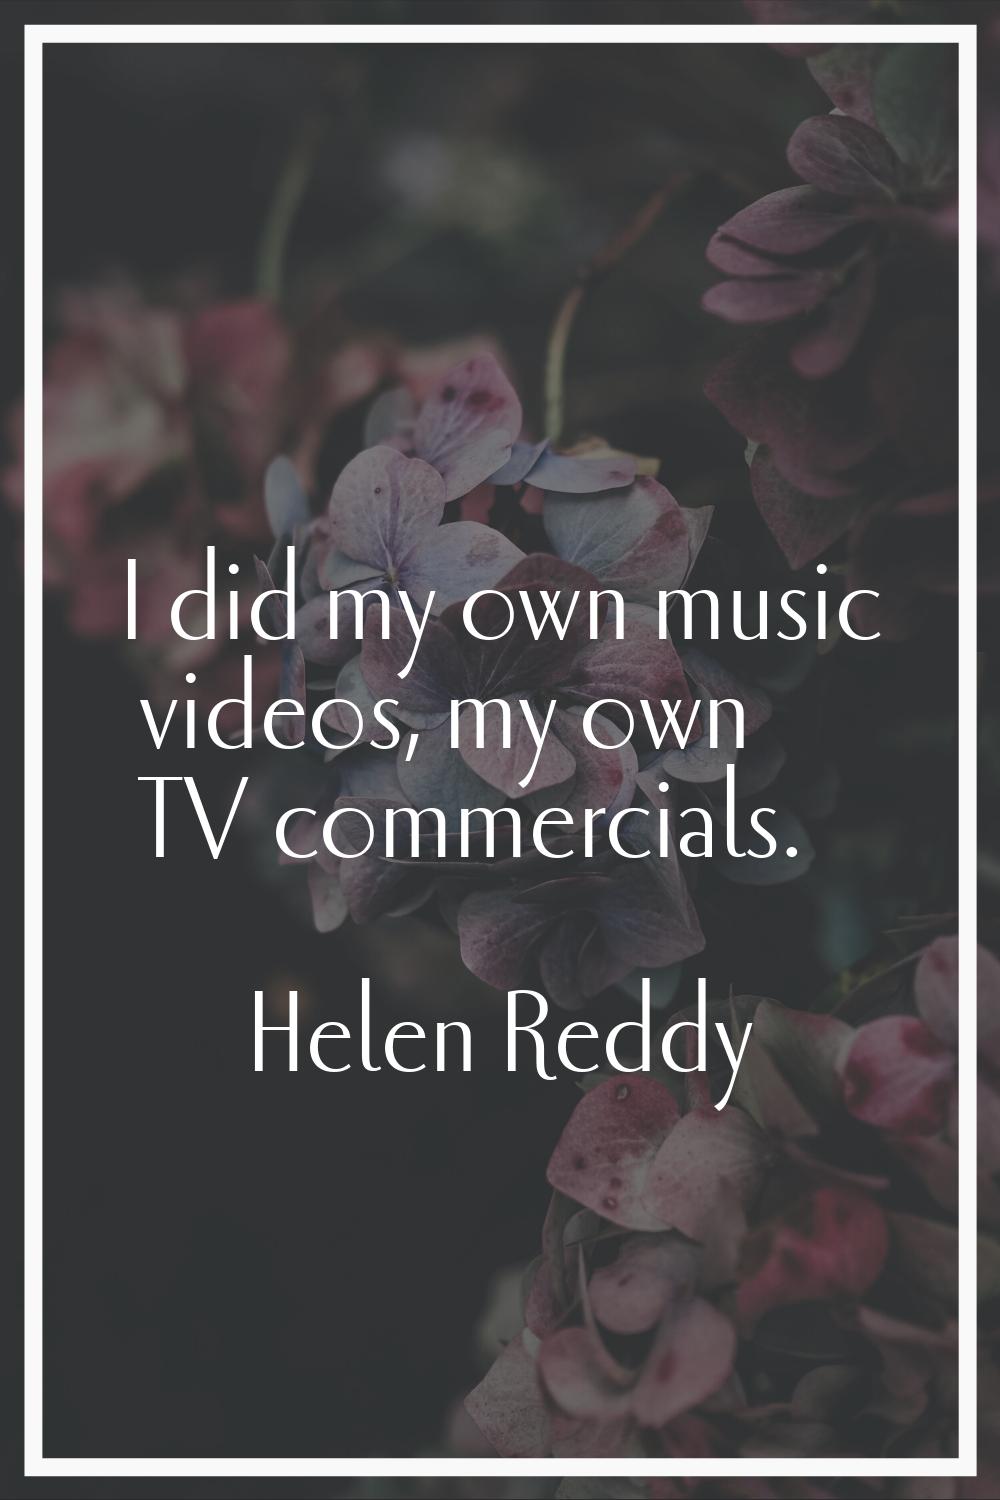 I did my own music videos, my own TV commercials.